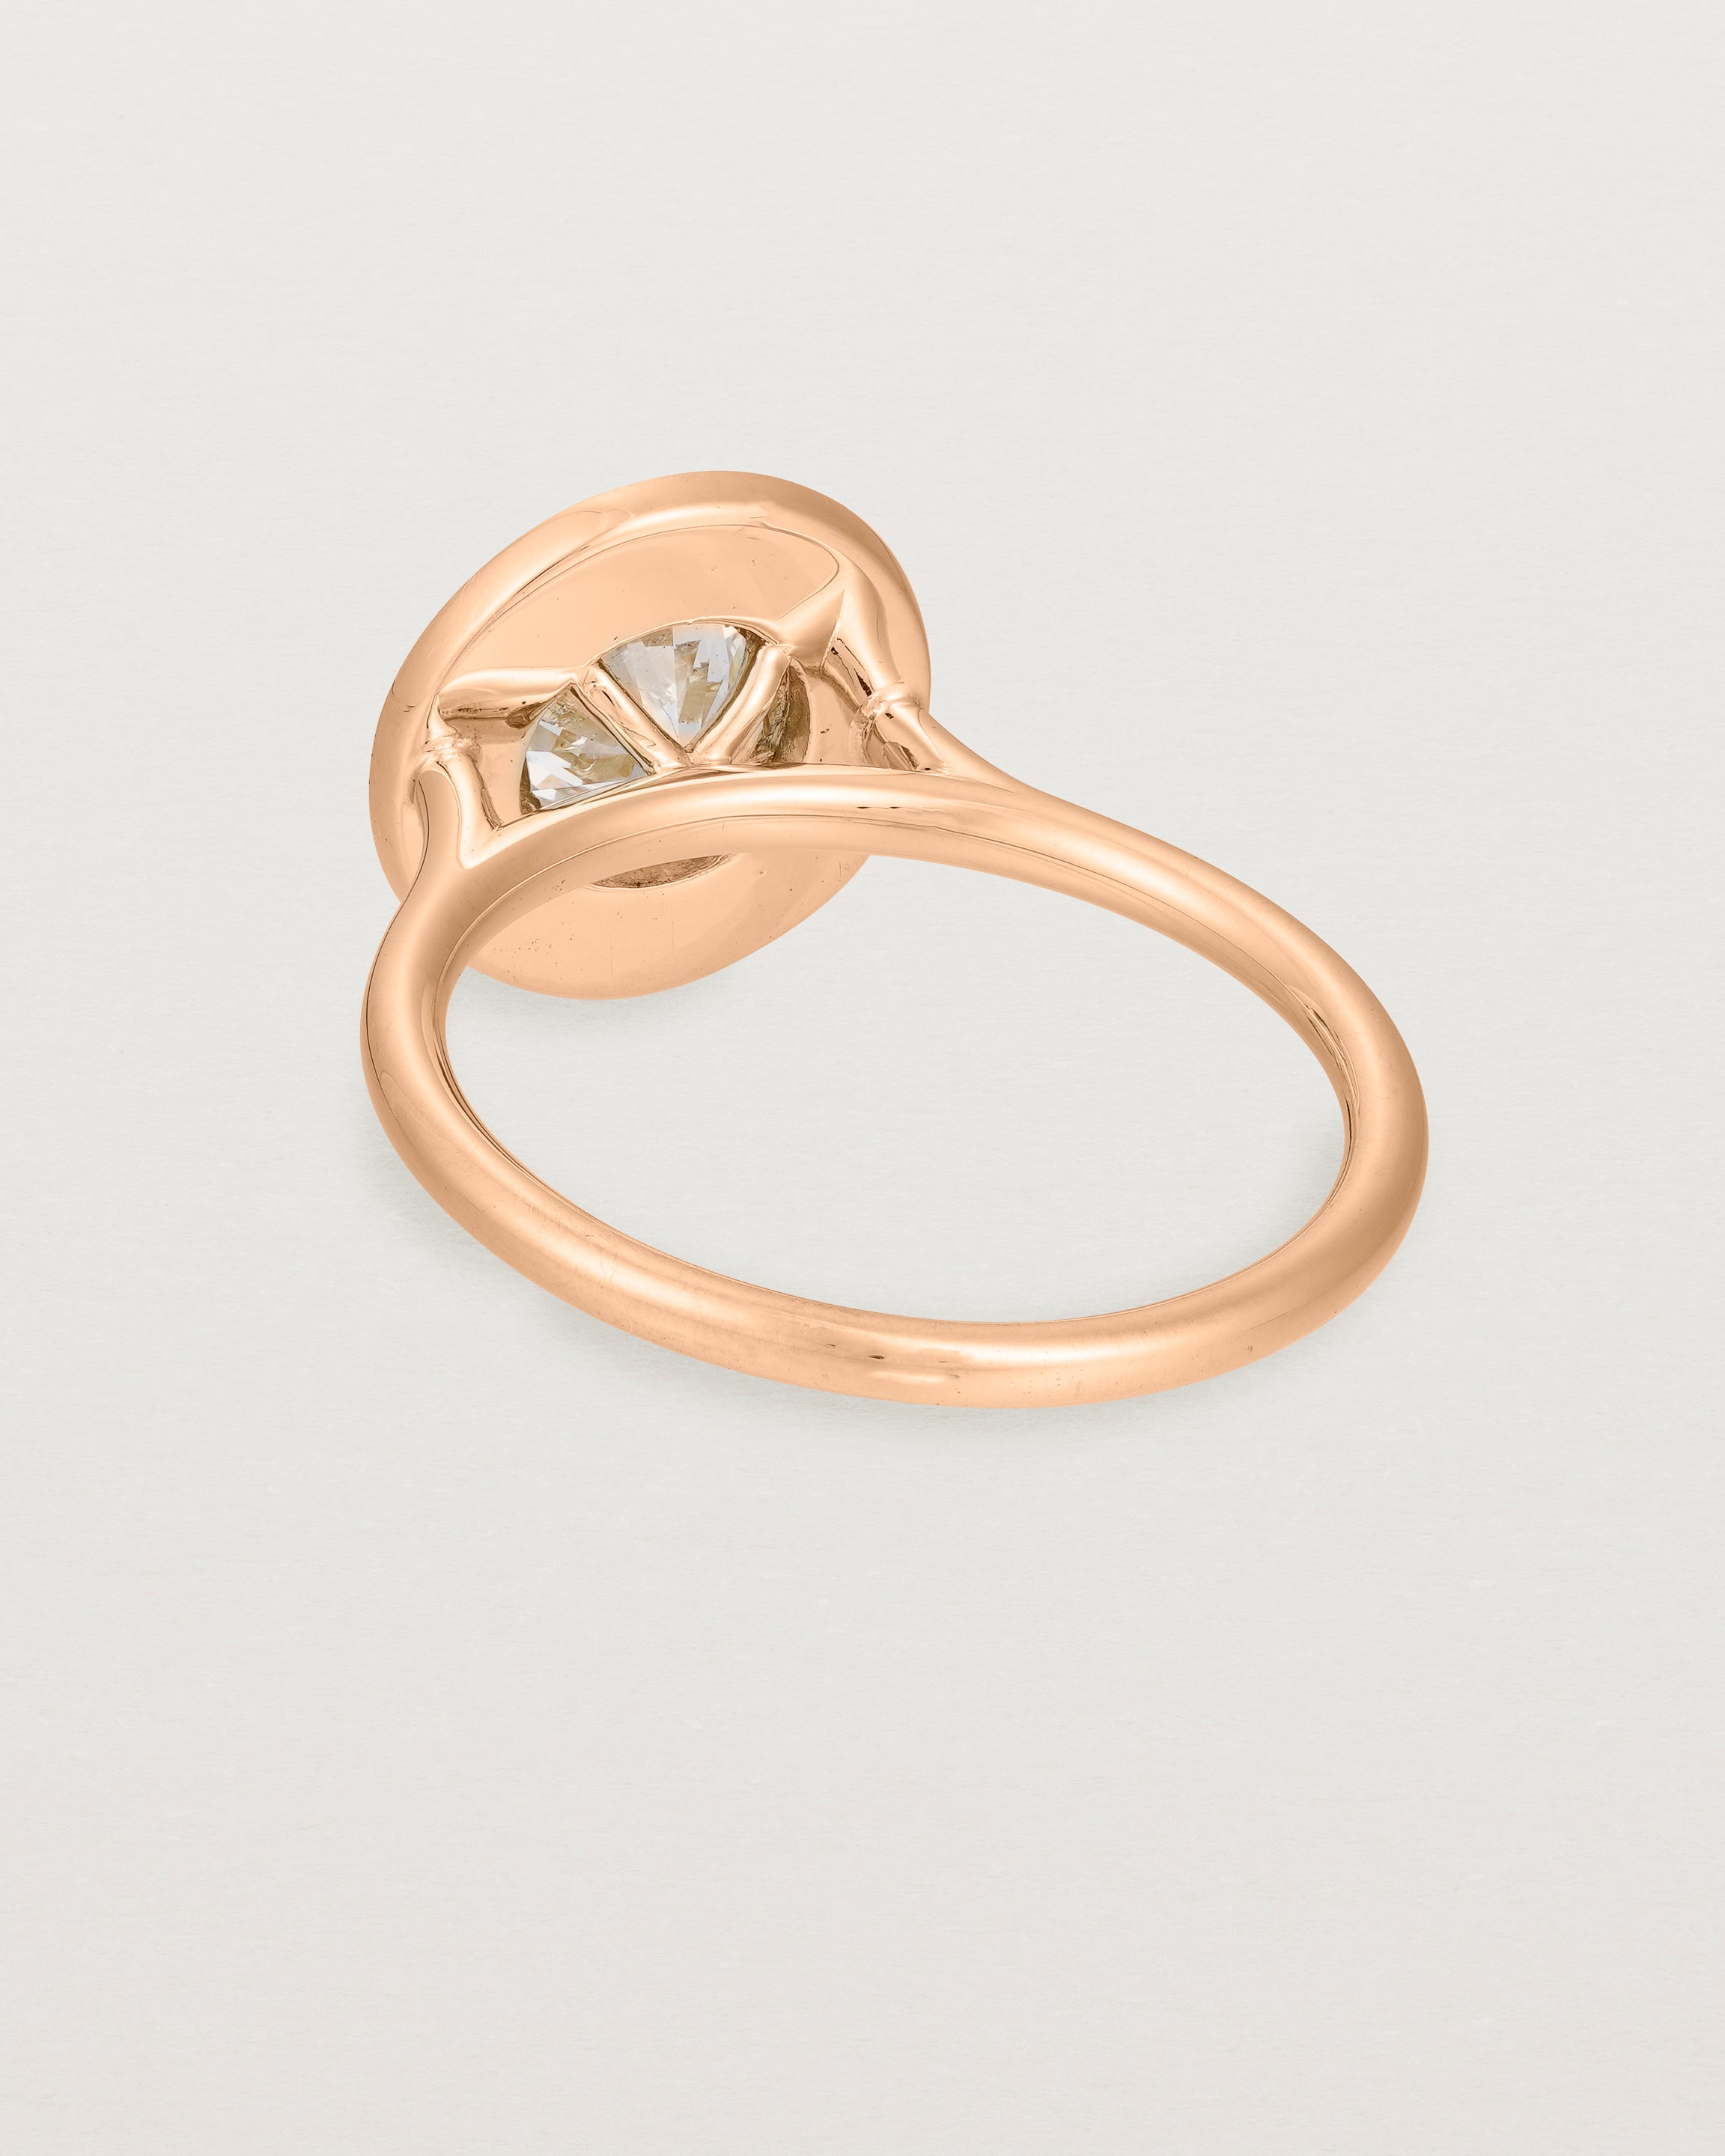 Back view of the Imogen Halo Ring | Laboratory Grown Diamonds in Rose Gold.